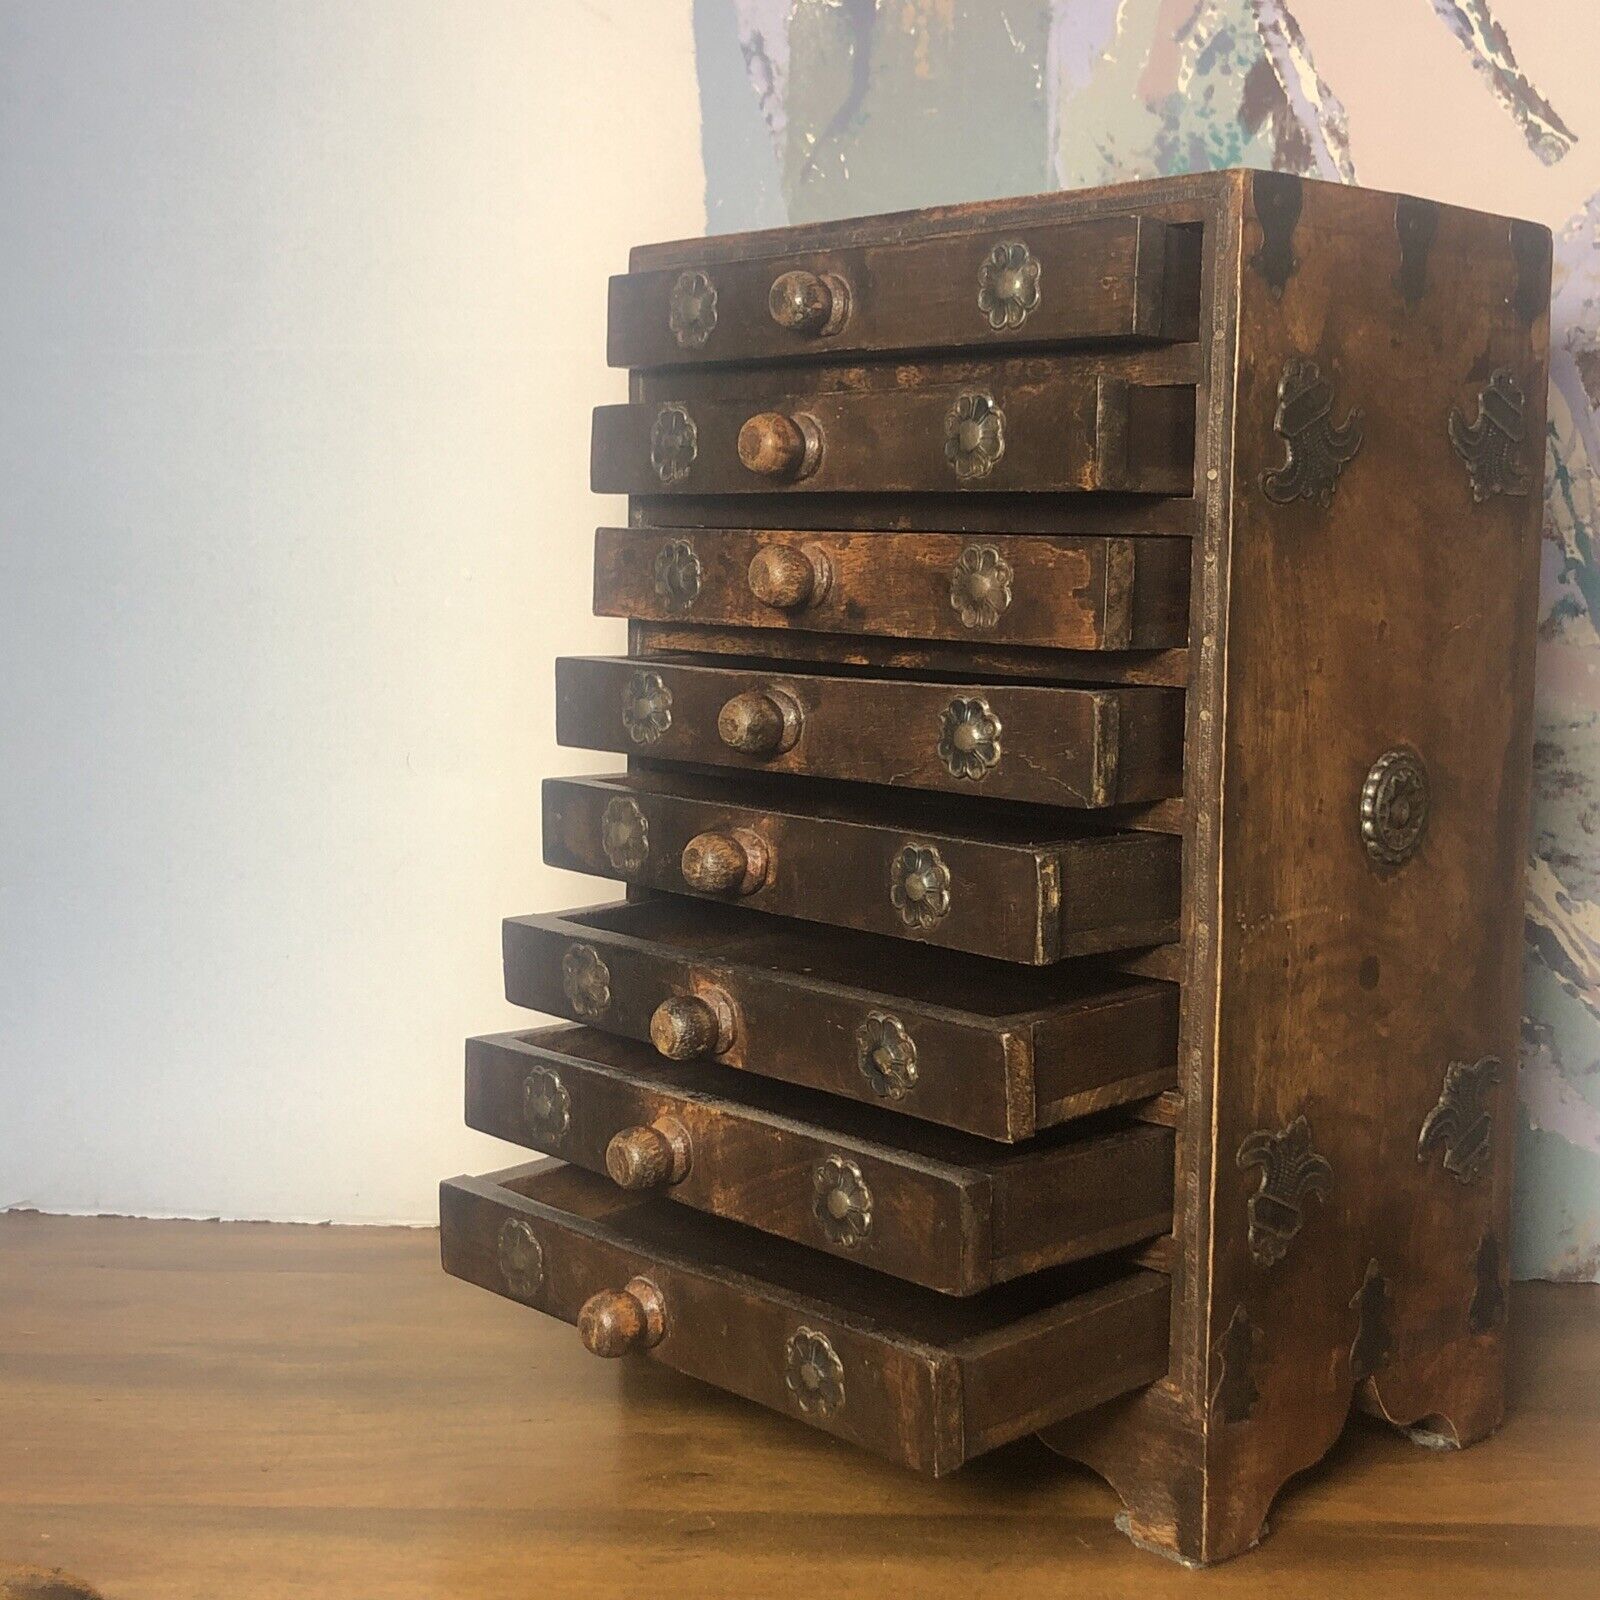 Antique Hindu Asian 8 Drawer Solid Wood Metal Jewelry Spice Organizer RARE